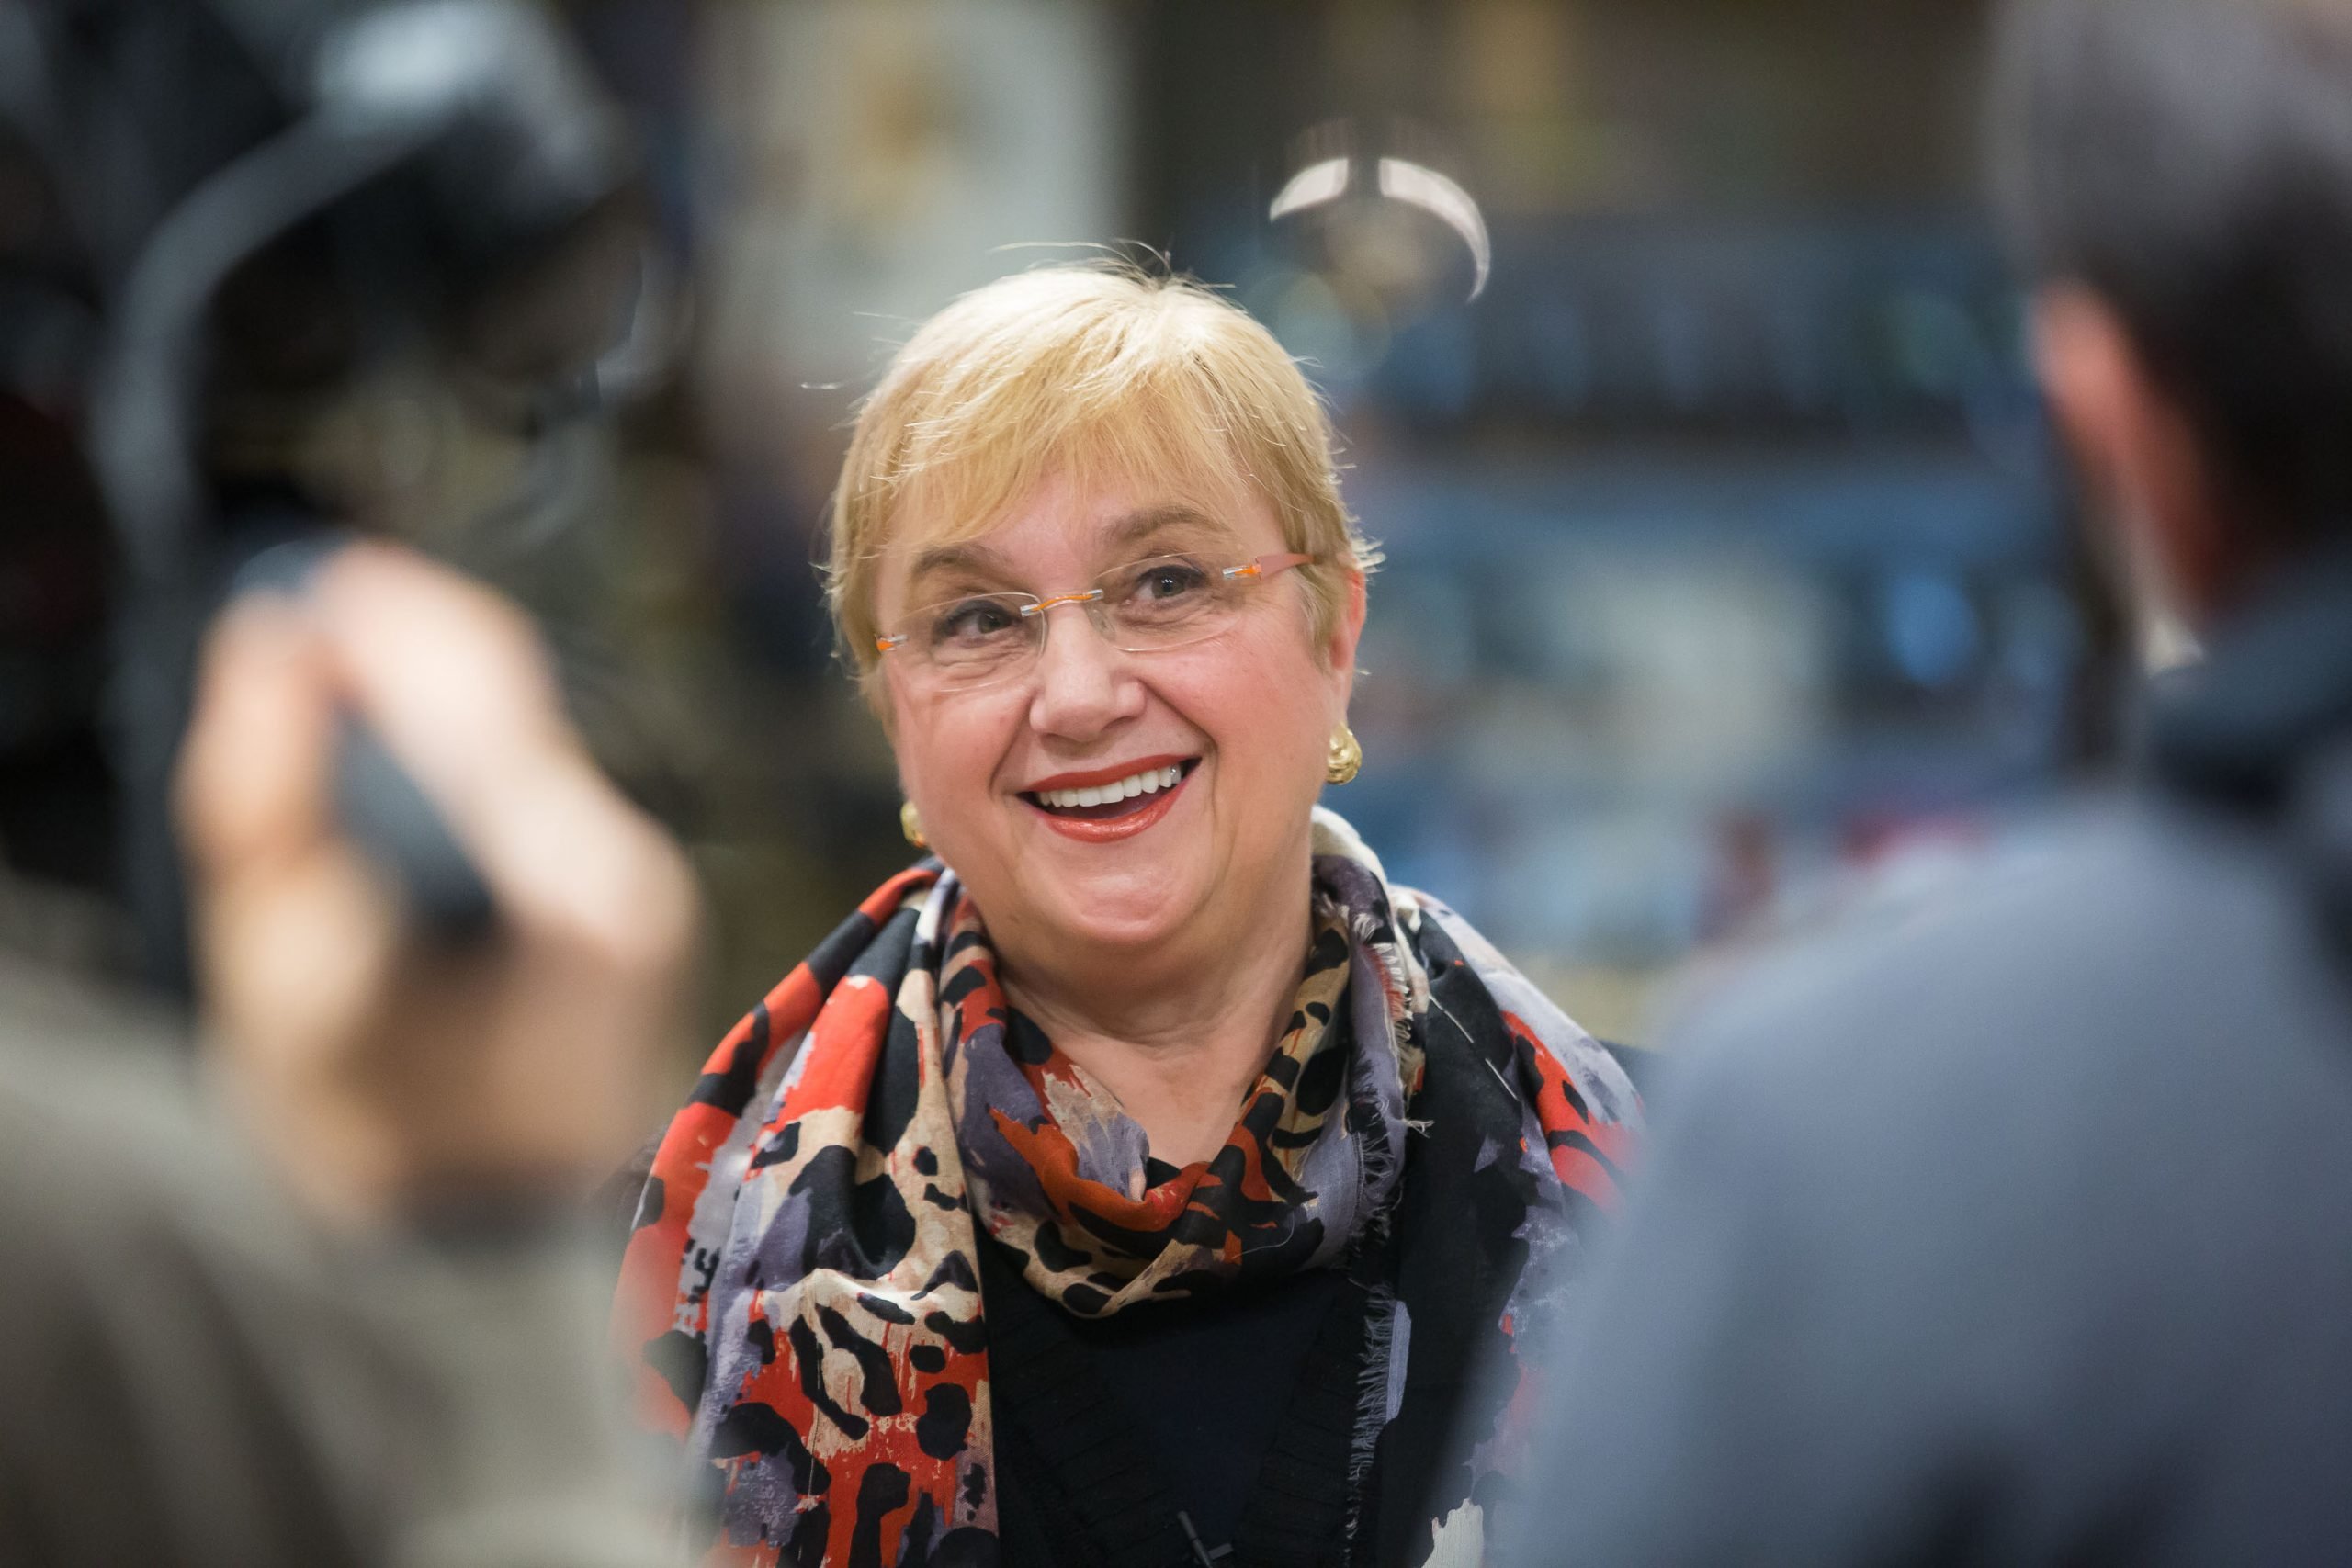 Celebrity chef Lidia Bastianich at Eataly in New York City in 2015.